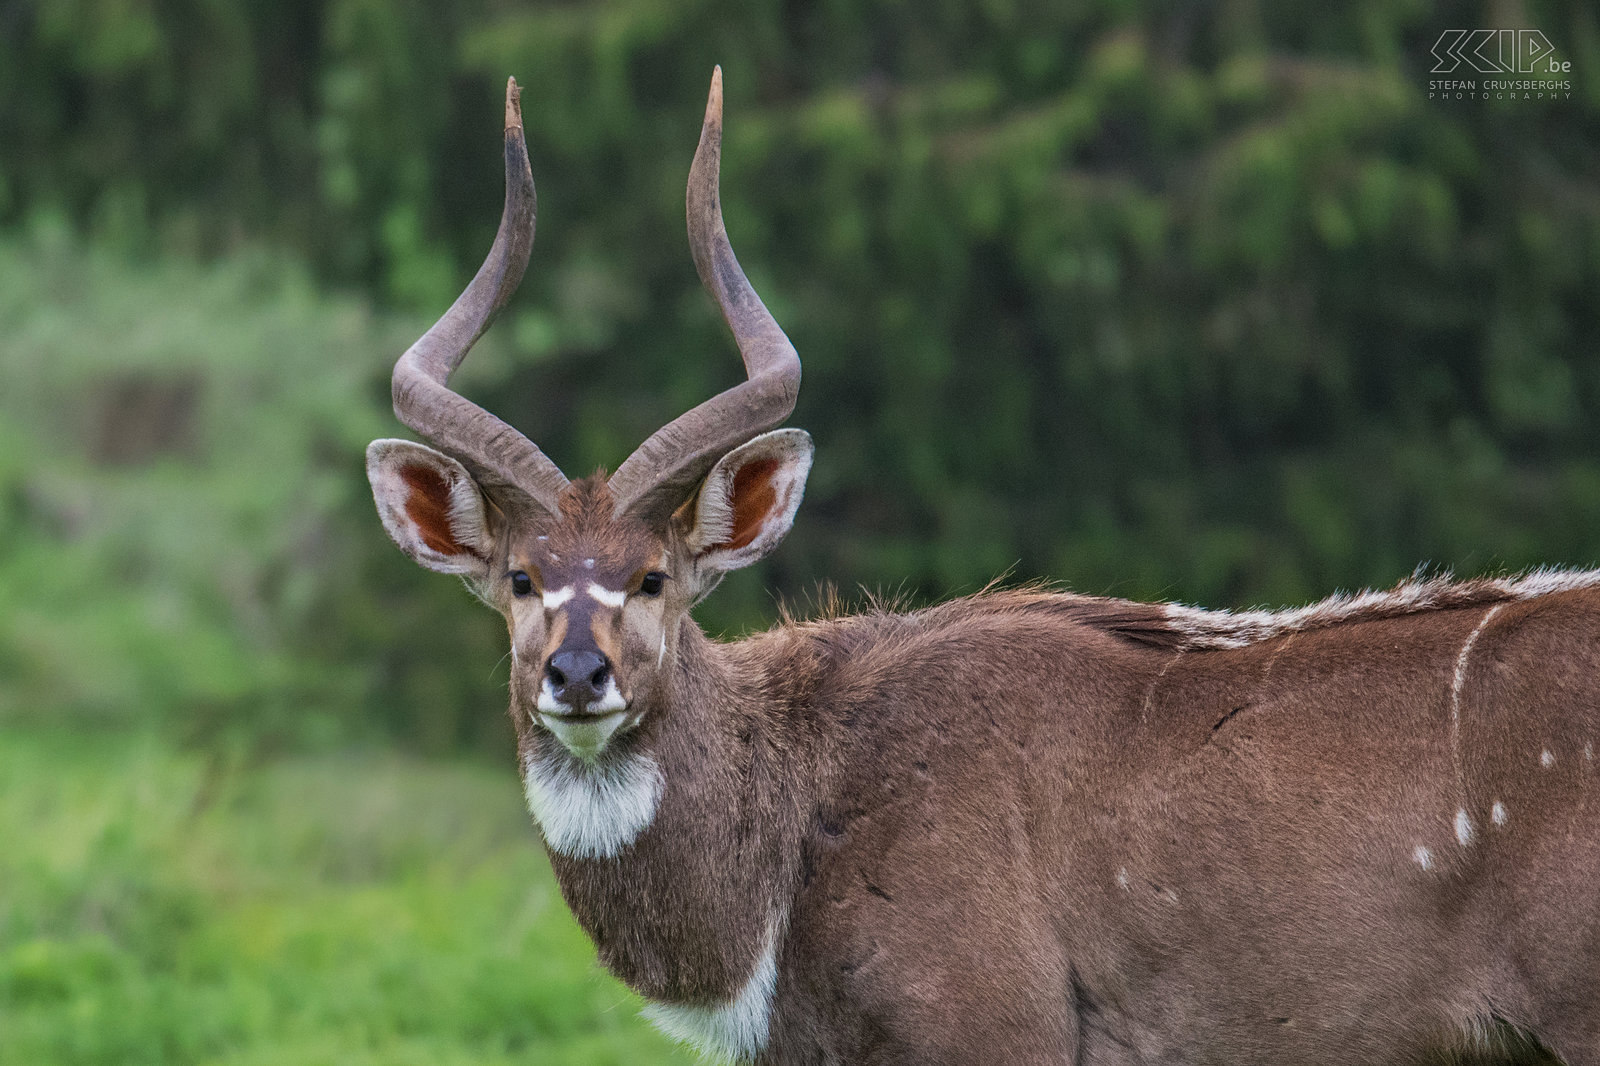 Bale Mountains - Dinsho - Mountain nyala  The mountain nyala was the last big antelope discovered by scientists. In the Bale Mountains there are still an estimated 3700 Stefan Cruysberghs